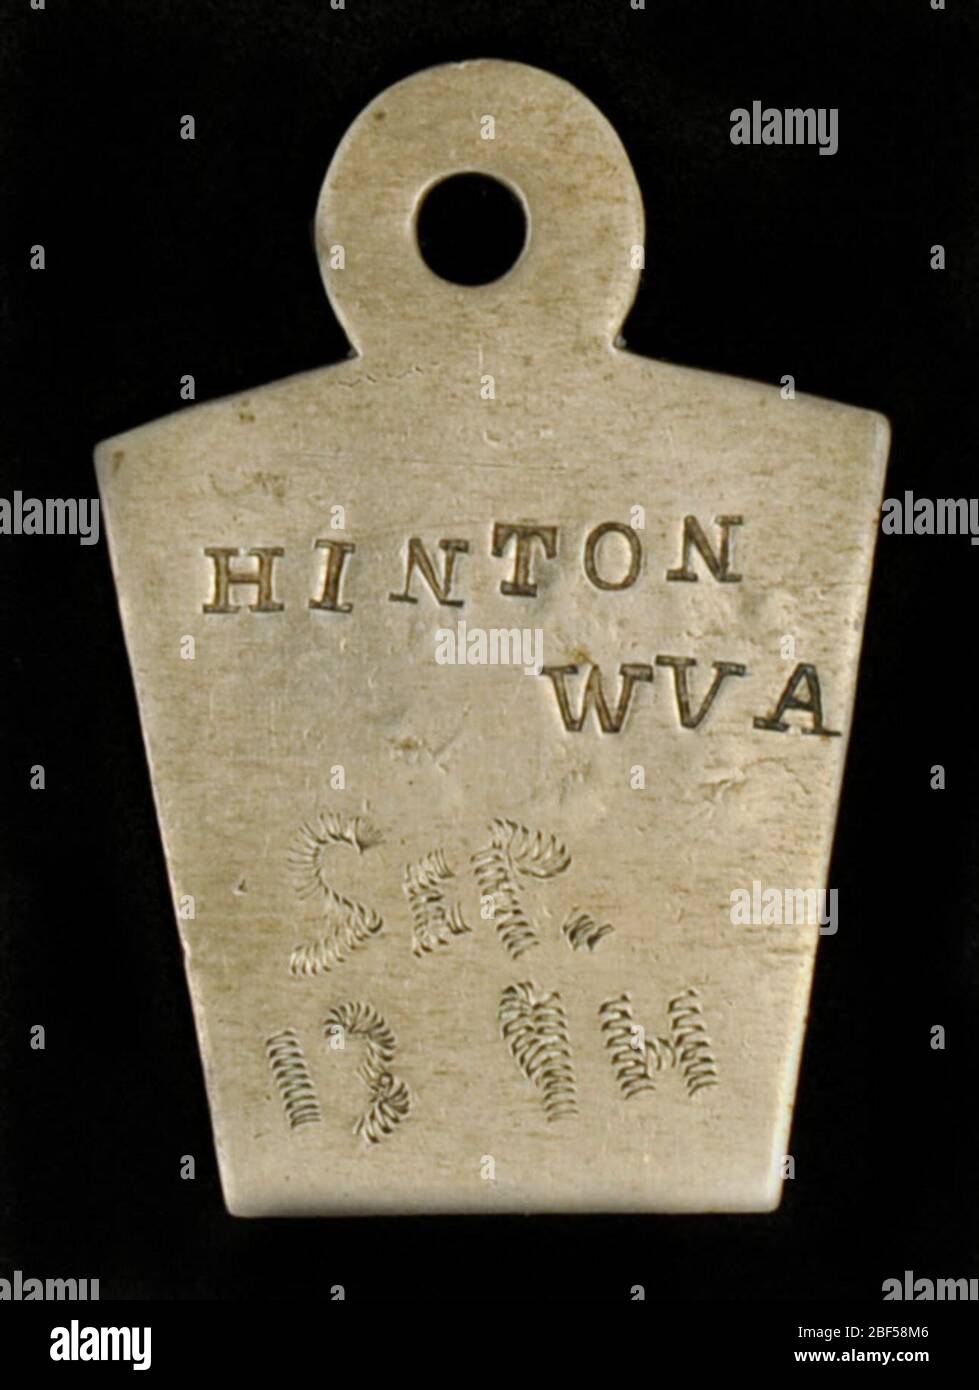 Hinton West Virginia Owney tag. The small town of Hinton, West Virginia, was well known to employees of the Railway Mail Service. The Chesapeake and Ohio Railway built a line through the town in the 1870s, making it a major terminal point. Stock Photo